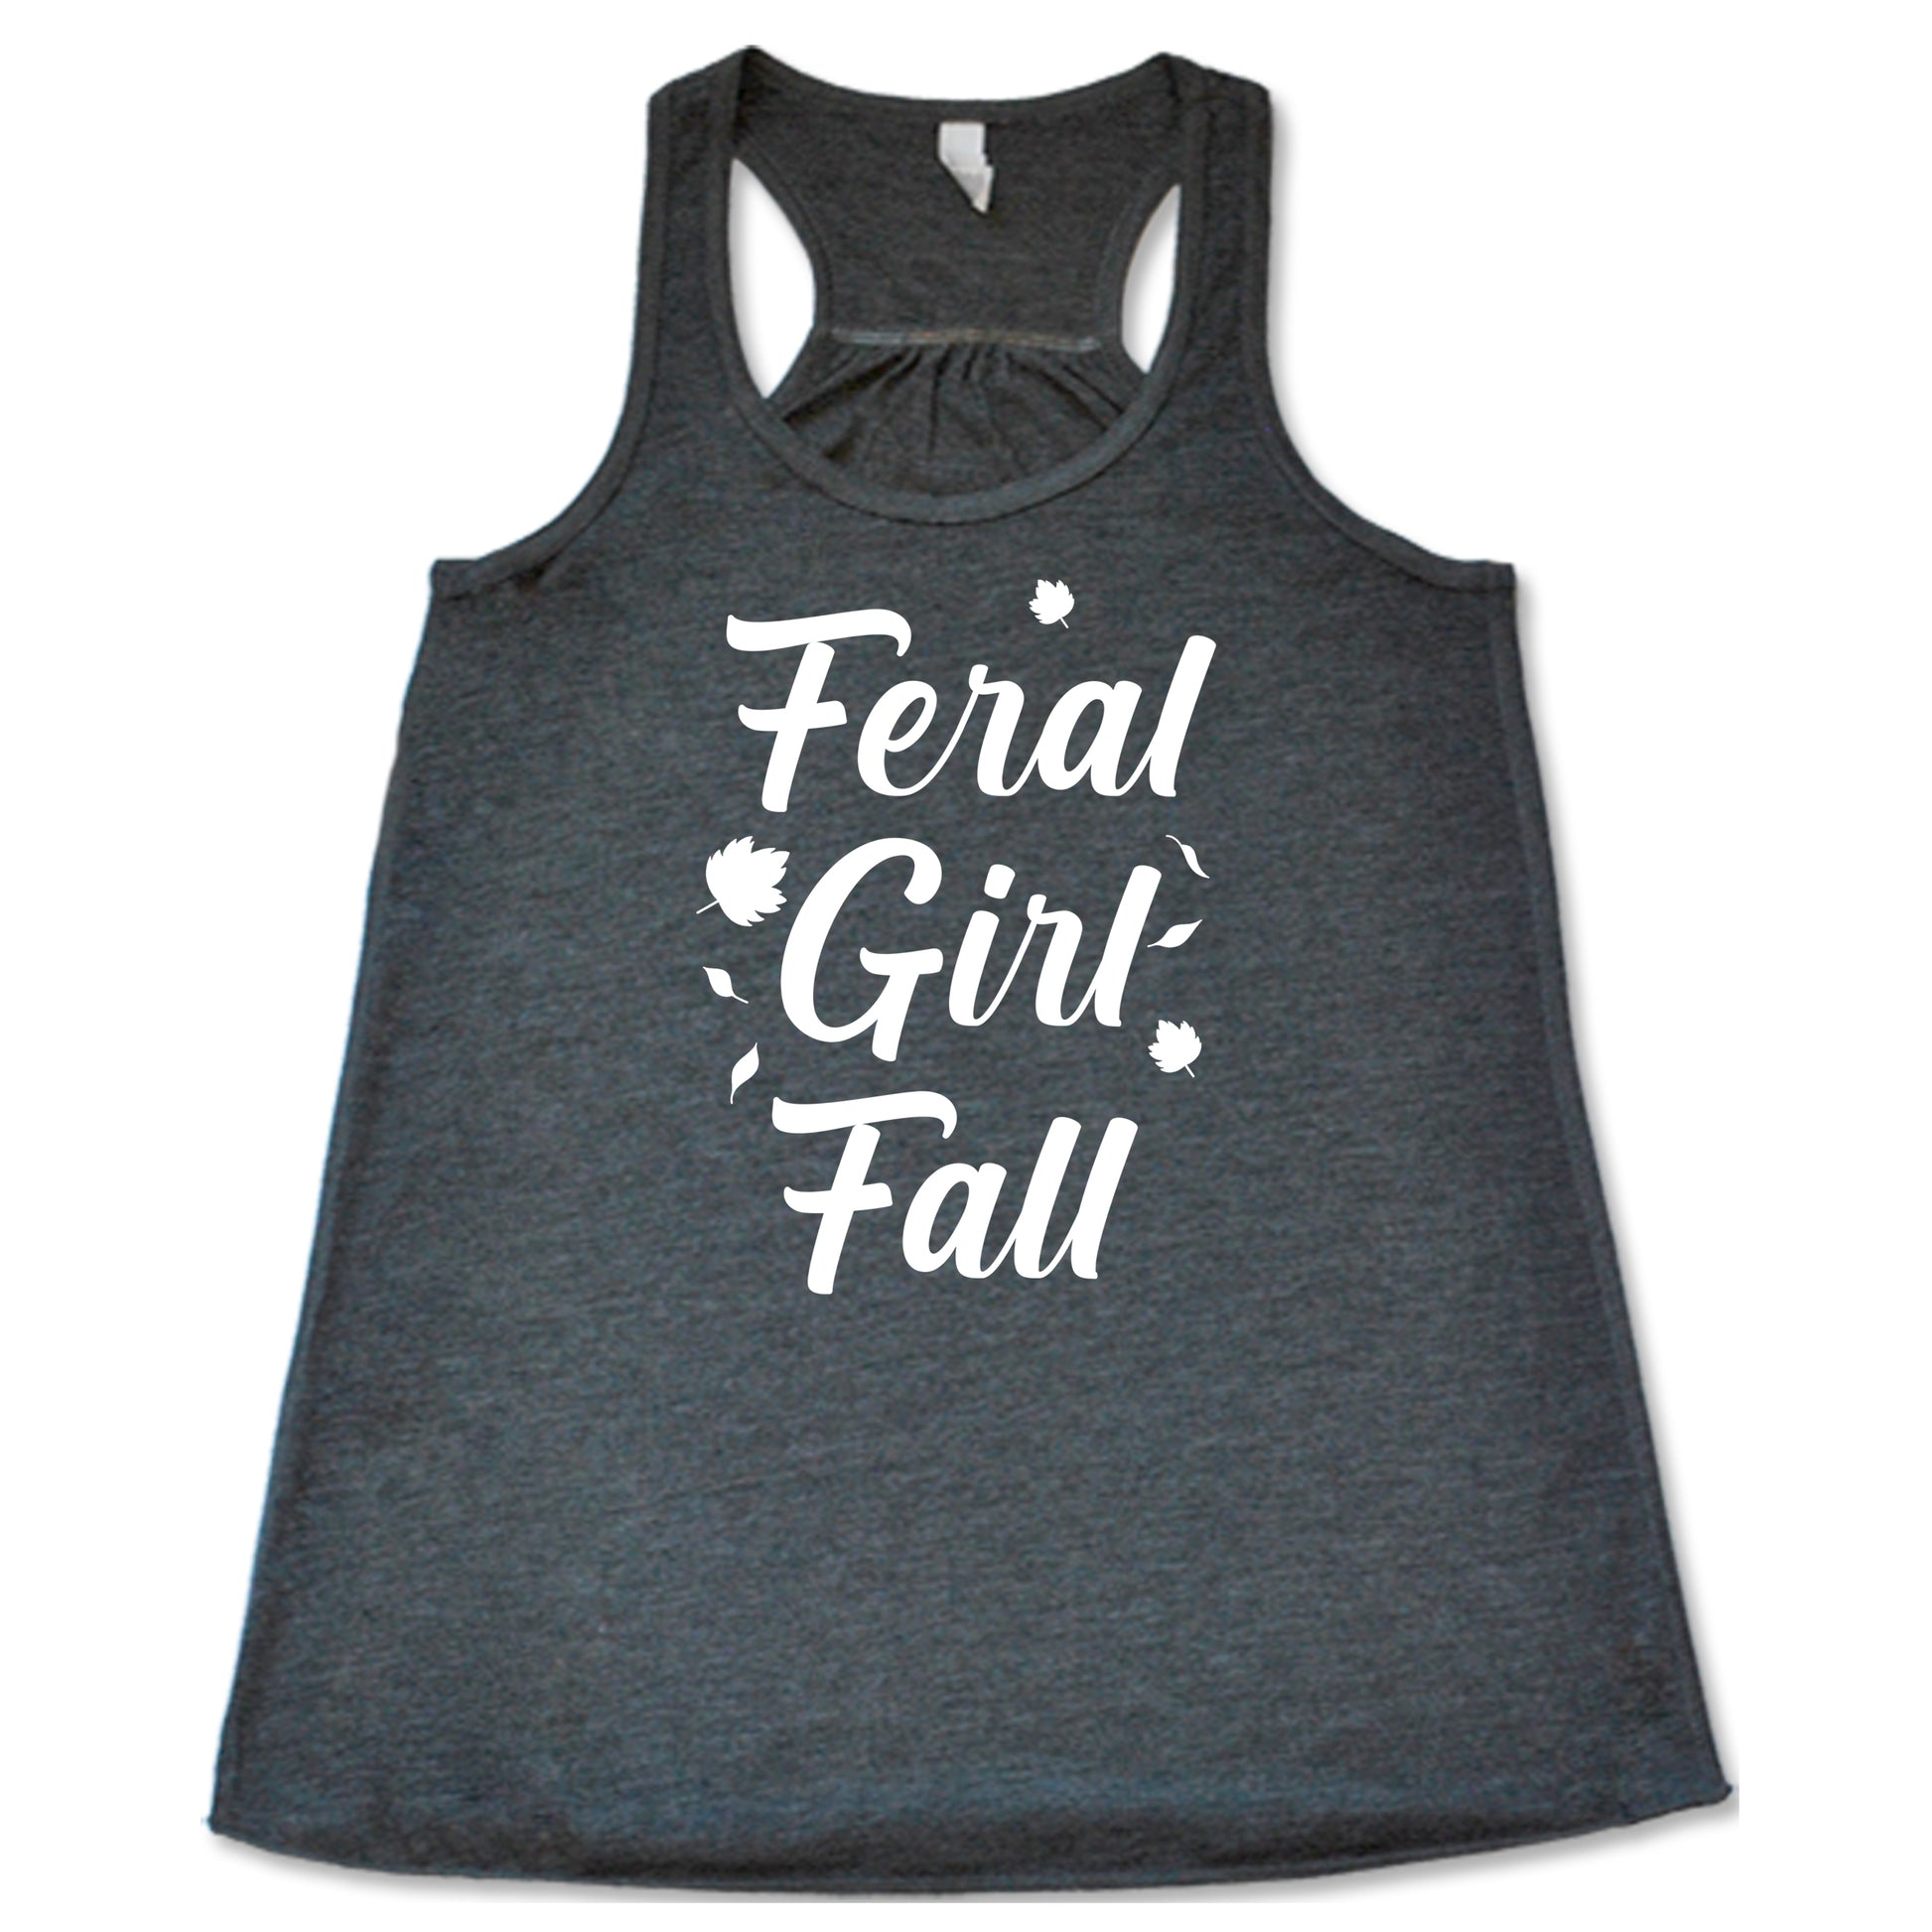 white quote "Feral Girl Fall" on a grey racerback shirt